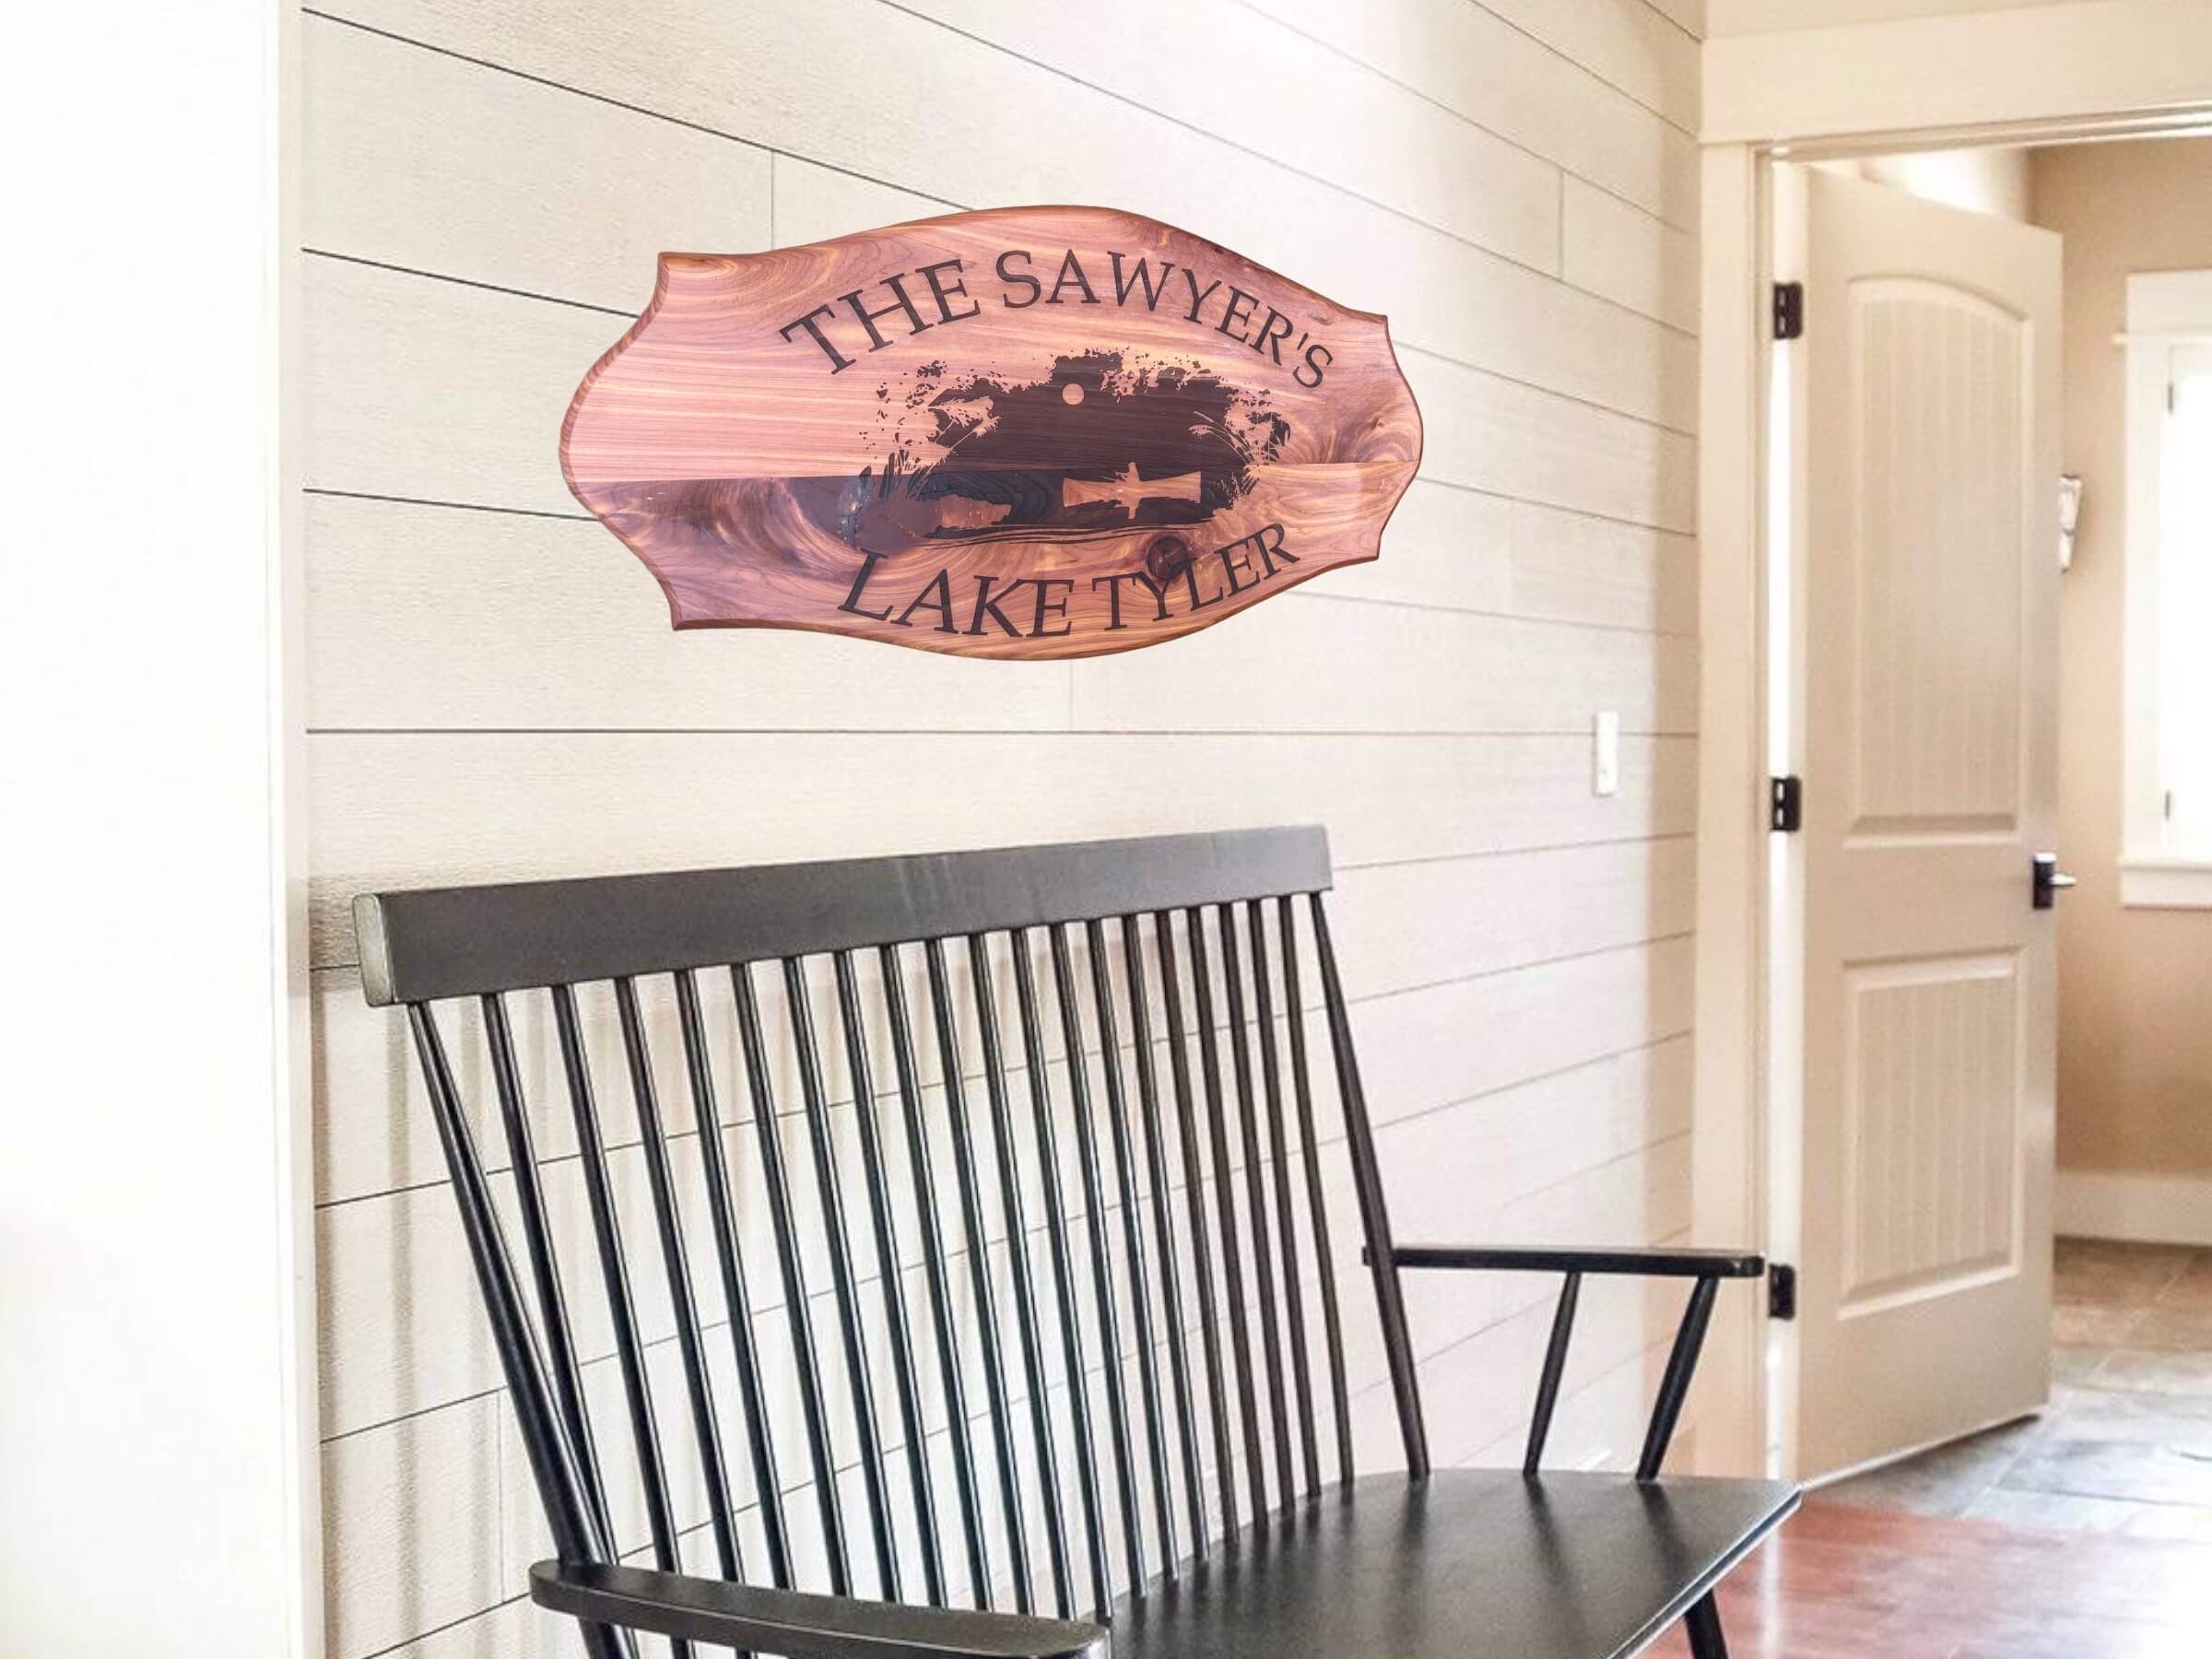 Rustic Cedar Lake House Sign with Customization" Description: A rustic lake house sign carved from cedar wood. The center of the sign showcases a laser-engraved image of a man fishing in a small boat. Customize it with your family name and lake name.